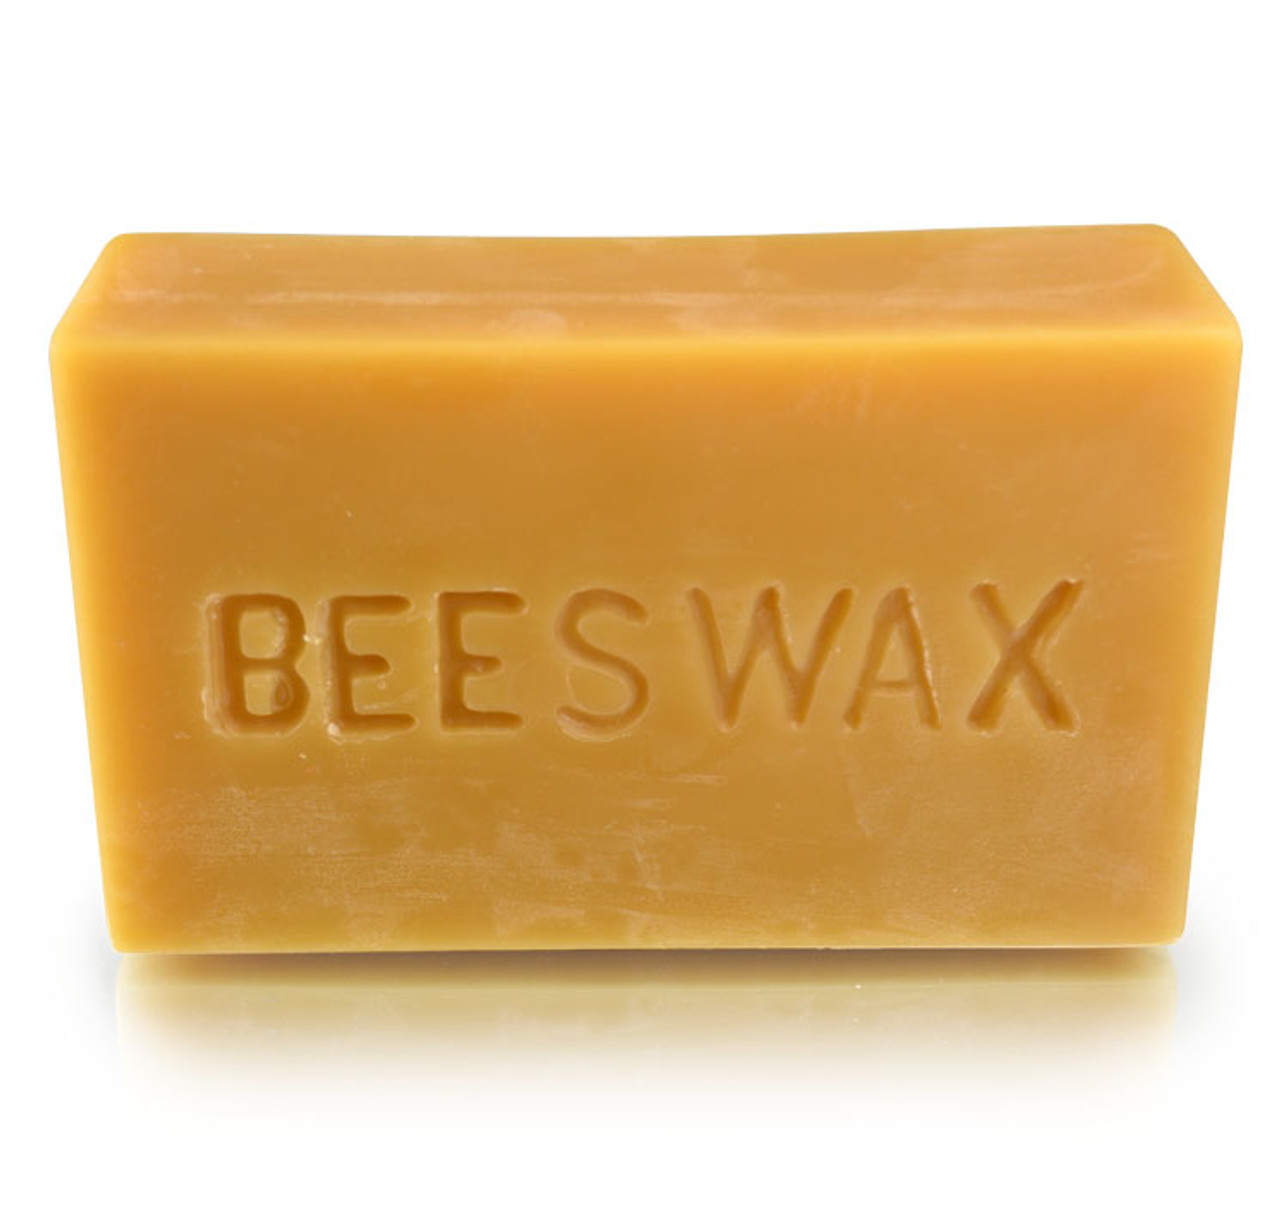 Beeswax Bar for Dry Skin 3 oz.